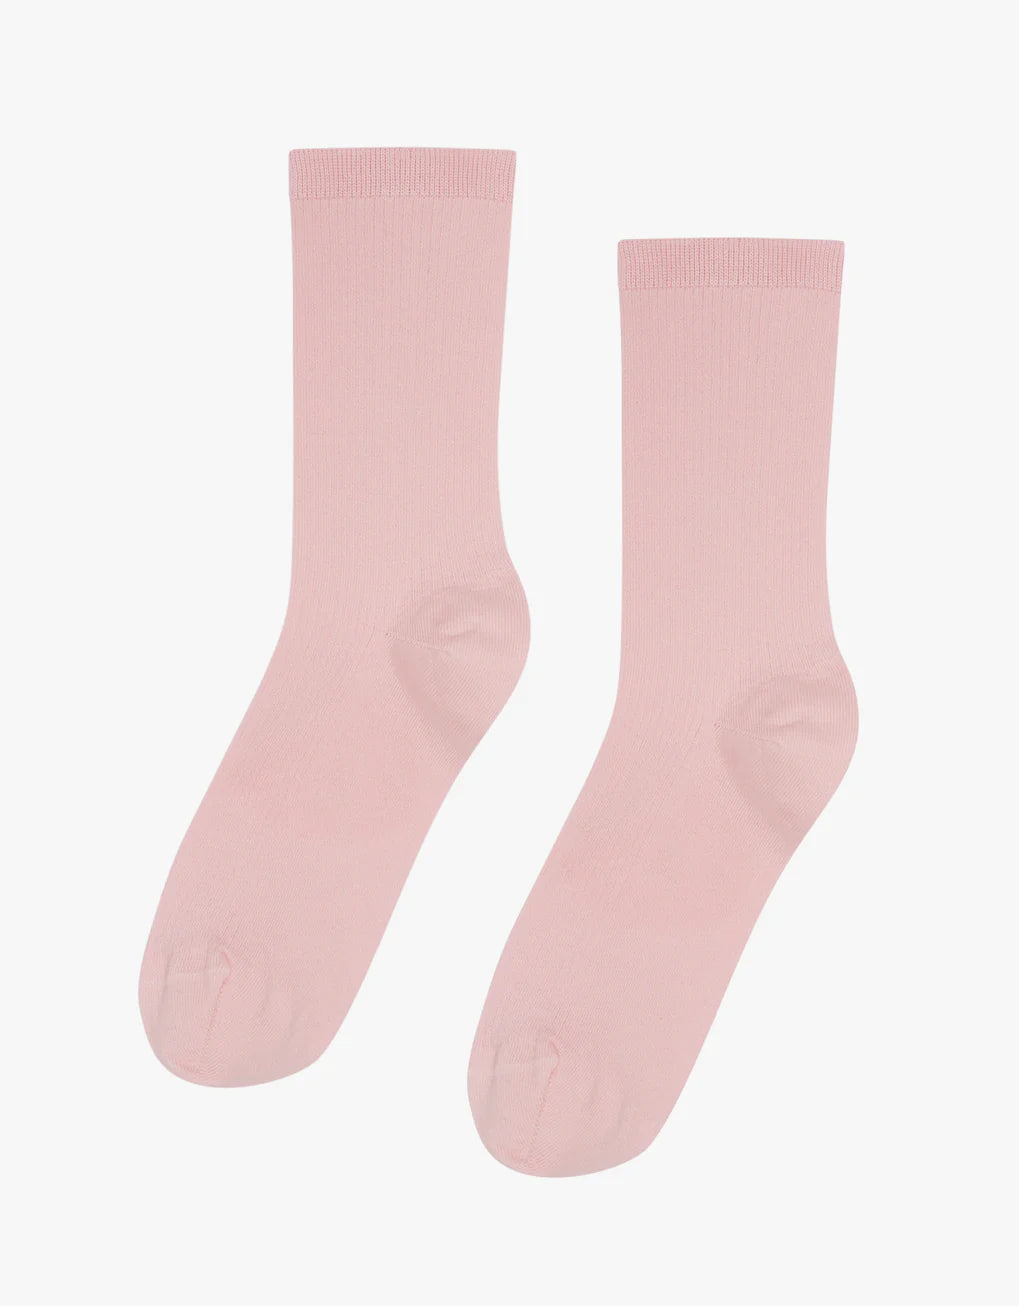 A pair of Colorful Standard Classic Organic Socks in pink, seamless and breathable, on a white background.